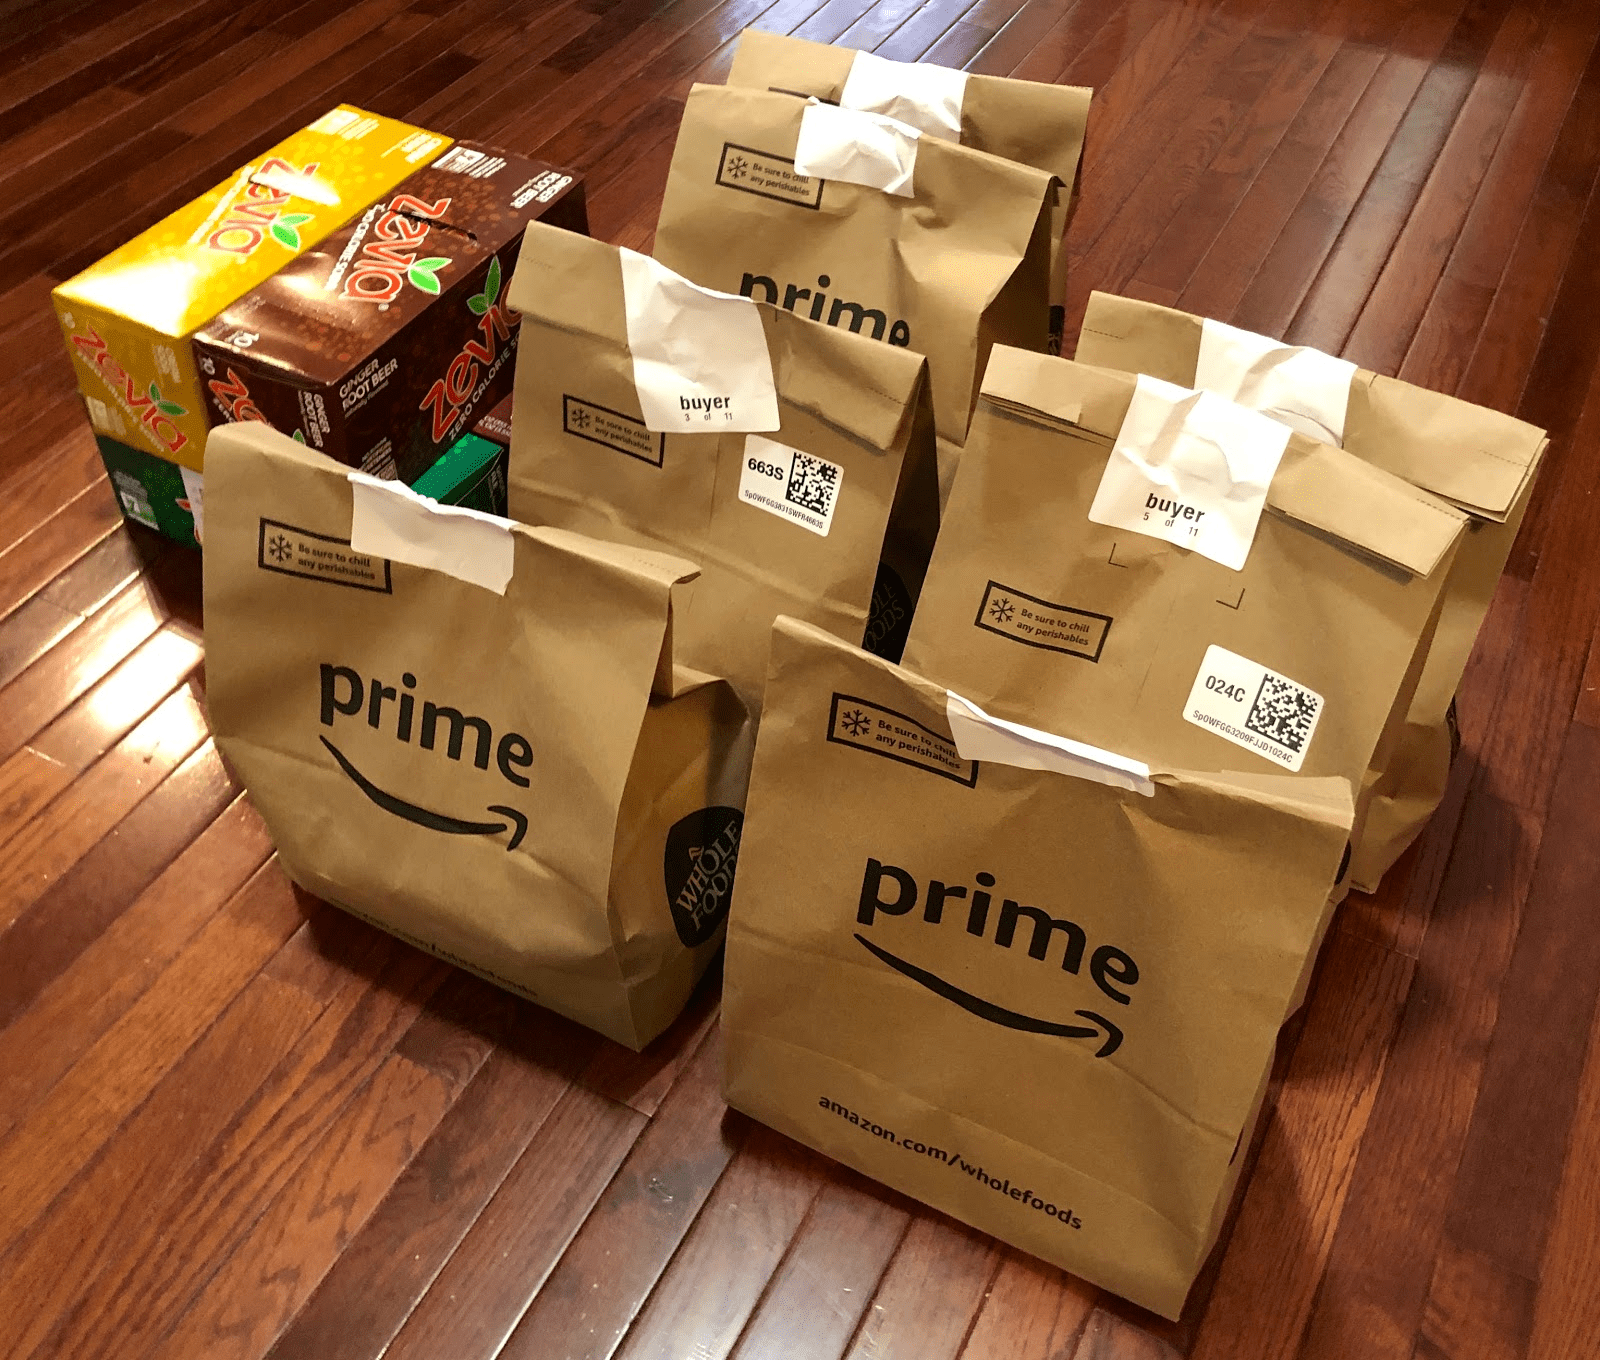 https://theceopublication.com/wp-content/uploads/2021/04/Amazon-is-planning-to-expand-its-service-that-lets-delivery-people-drop-off-groceries-in-your-garage.png